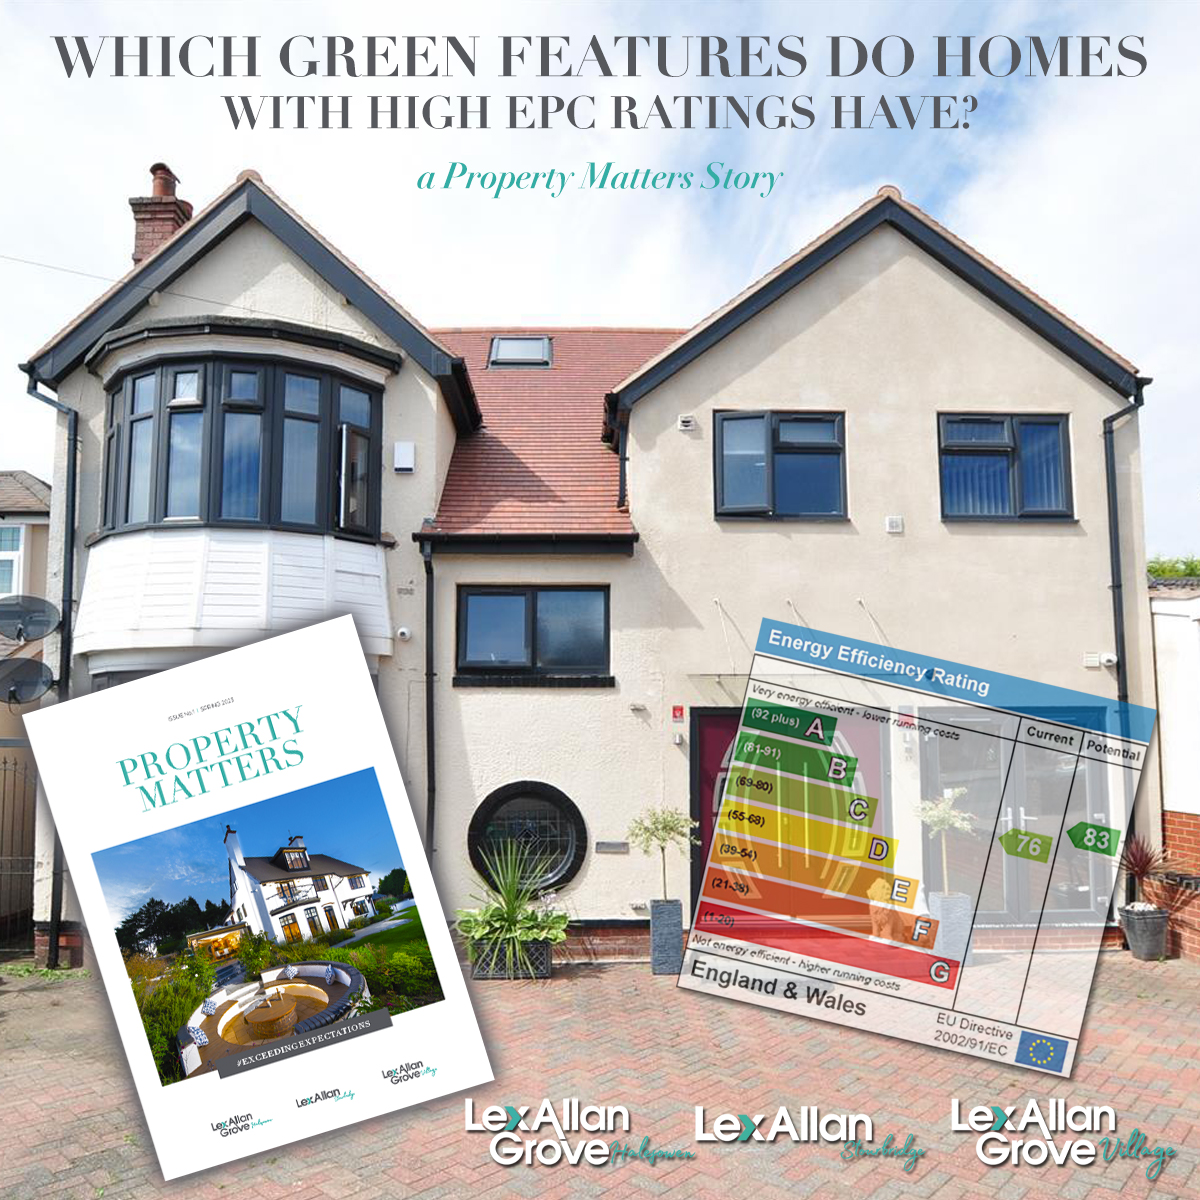 A story from our Spring Edition of #PropertyMatters, takes a look at key features that contribute to your home’s #energyefficiency
#Property #EstateAgents #ExceedingExpectations #Hagley #Halesowen #Stourbridge #WestMidlands #Worcestershire #Birmingham #EPC
lexallan.co.uk/success-storie…